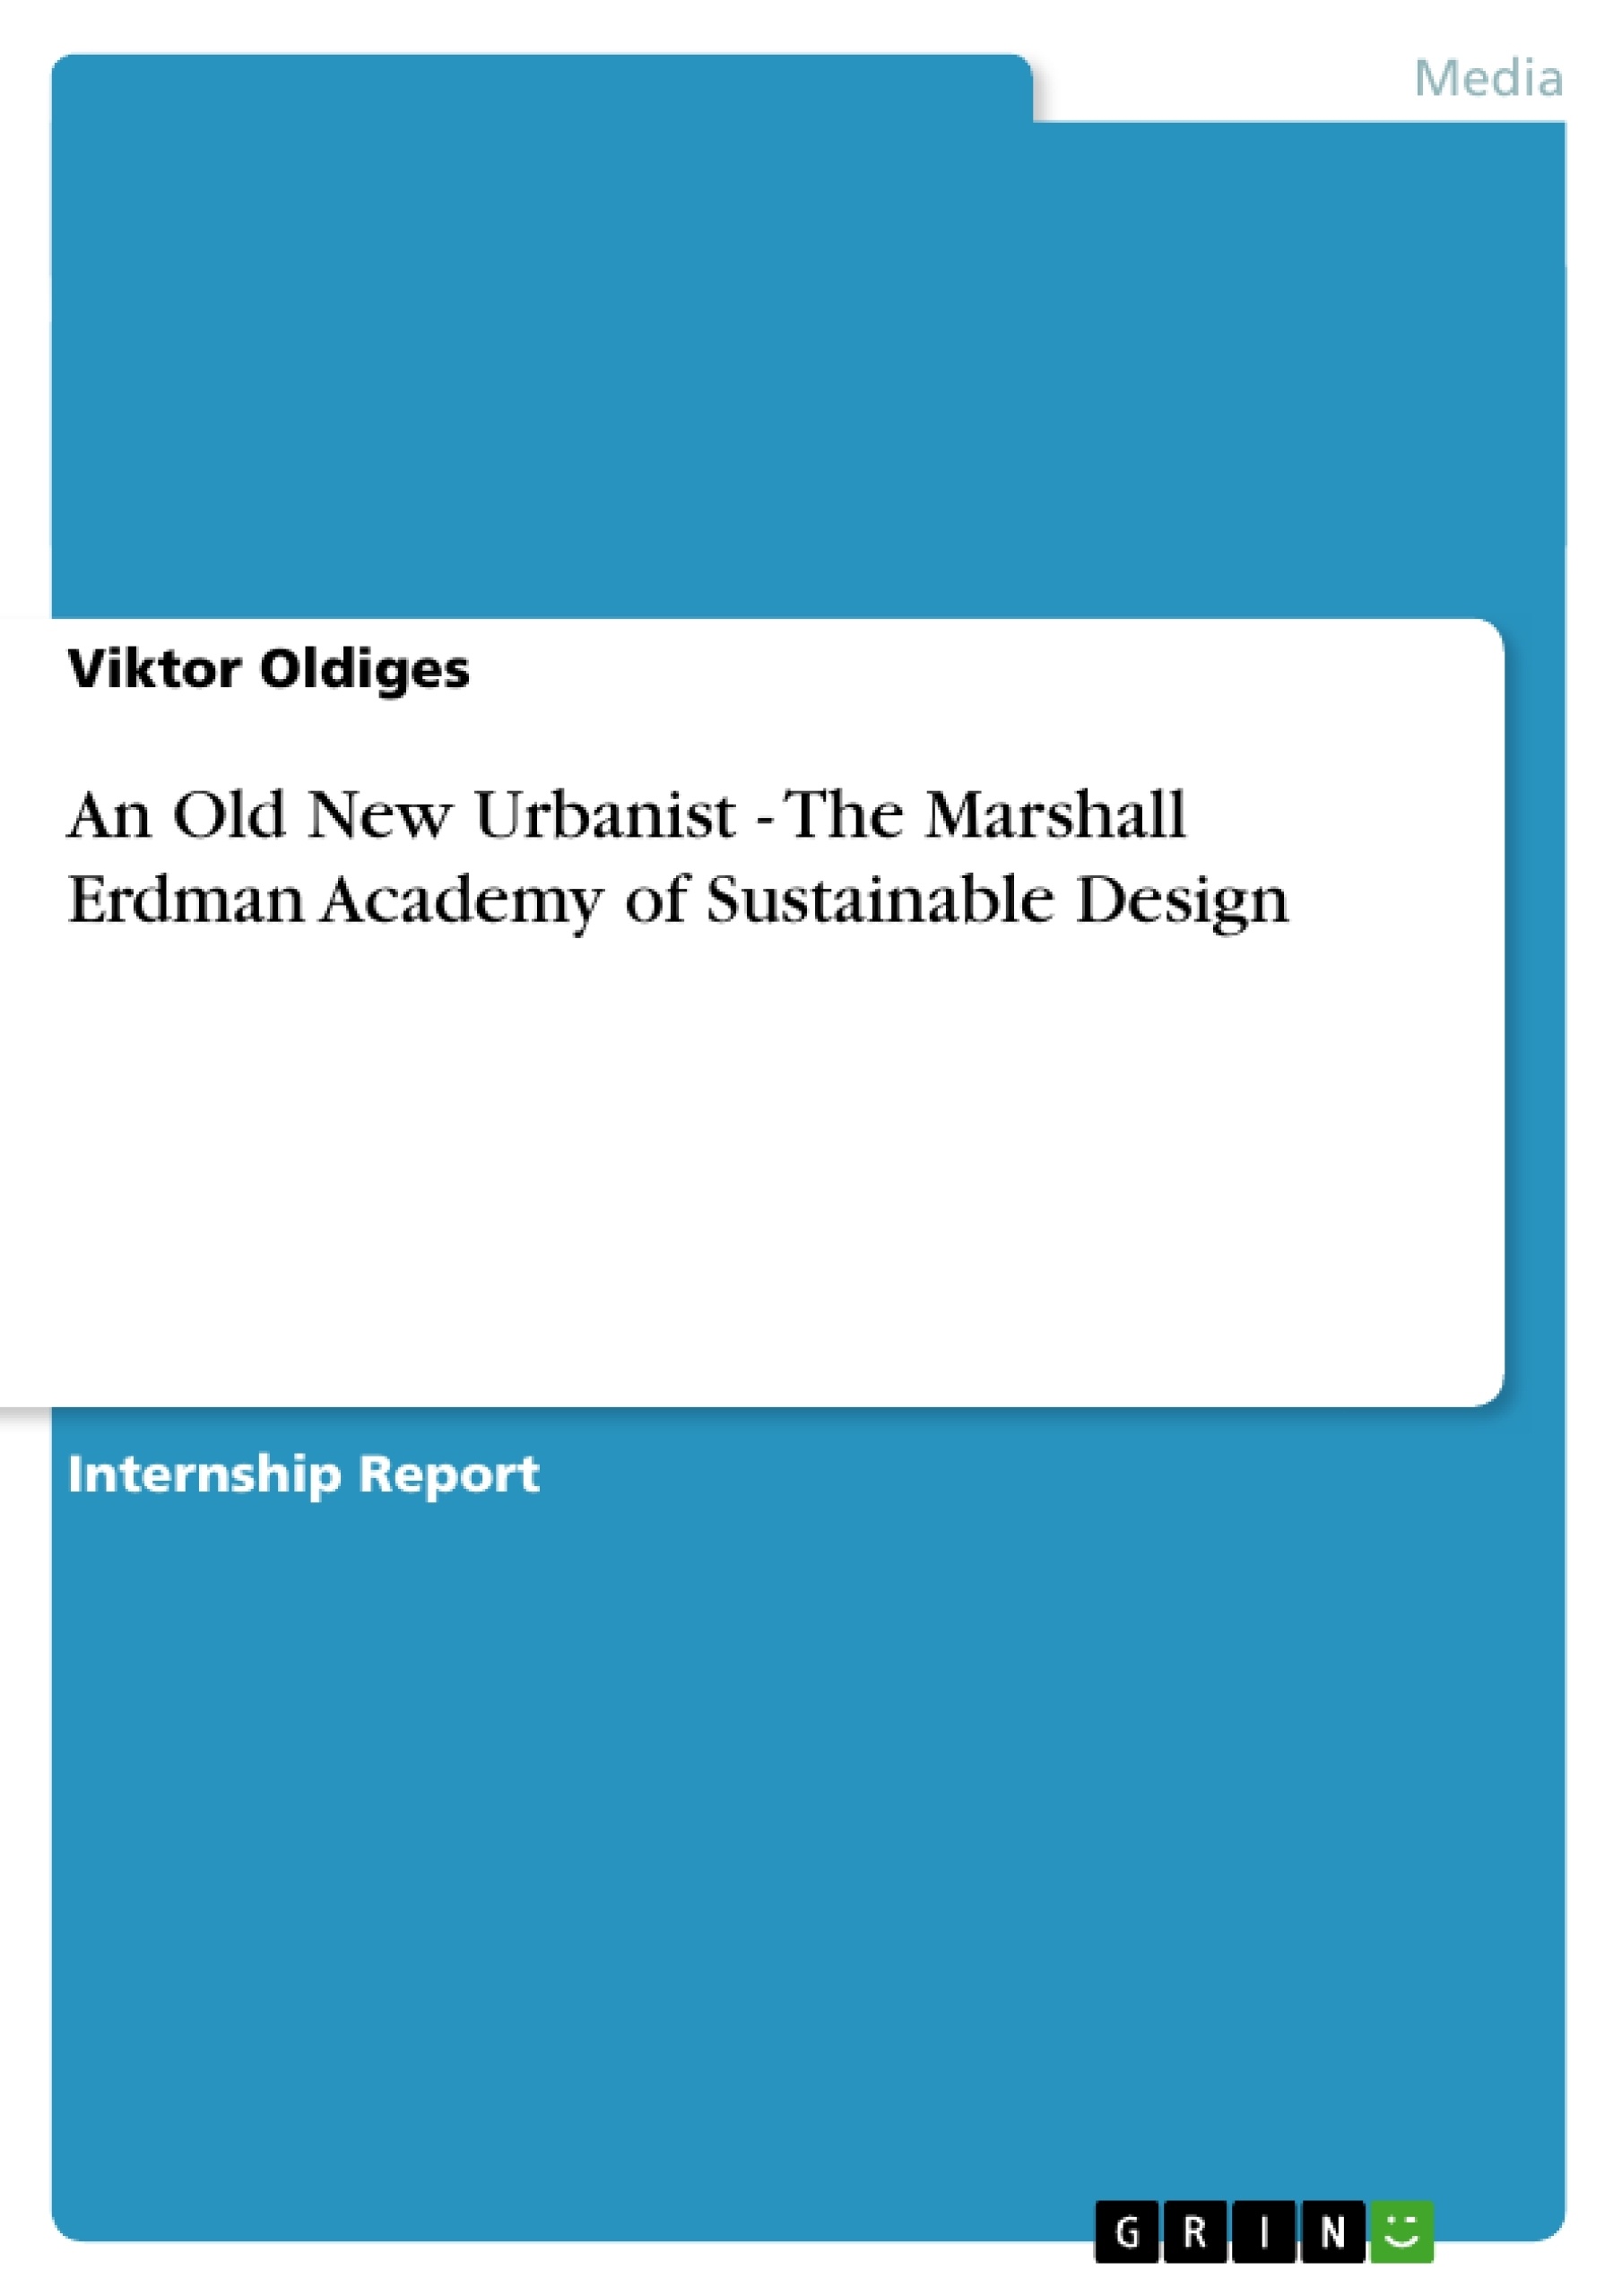 Title: An Old New Urbanist - The Marshall Erdman Academy of Sustainable Design